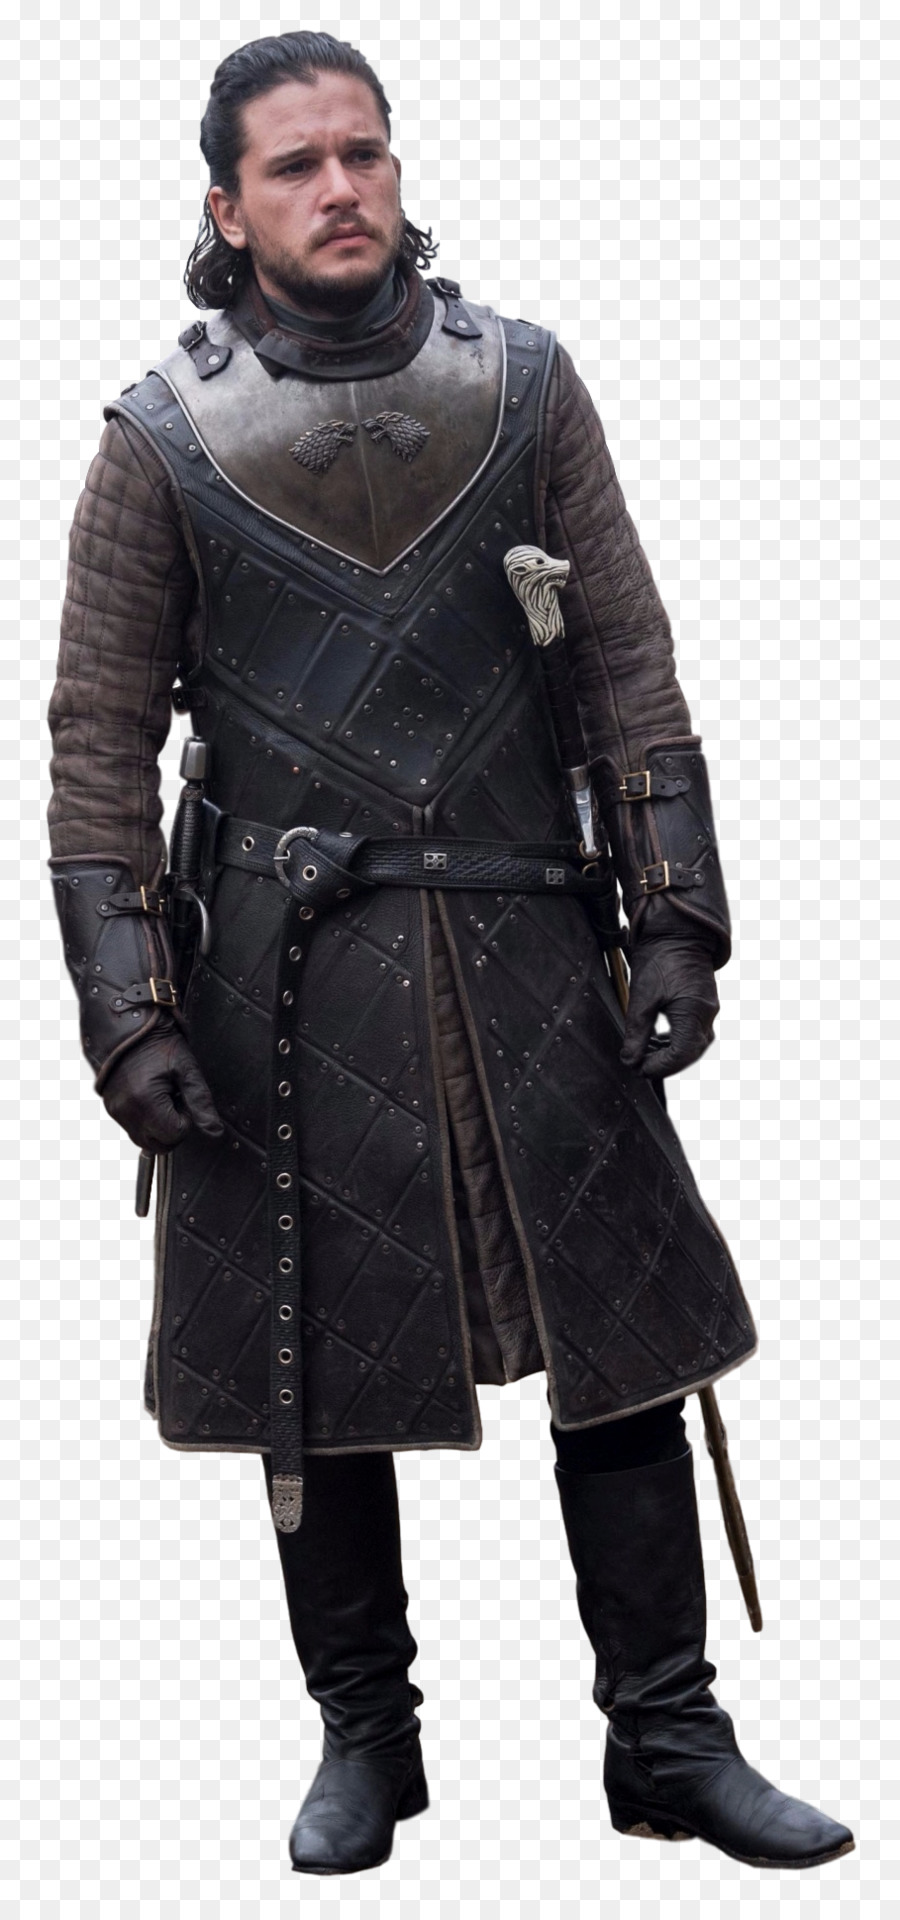 Jon Snow Game of Thrones Cersei Lannister Daenerys Targaryen Tyrion Lannister - Game  of trones png download - 909*1929 - Free Transparent Jon Snow png Download.